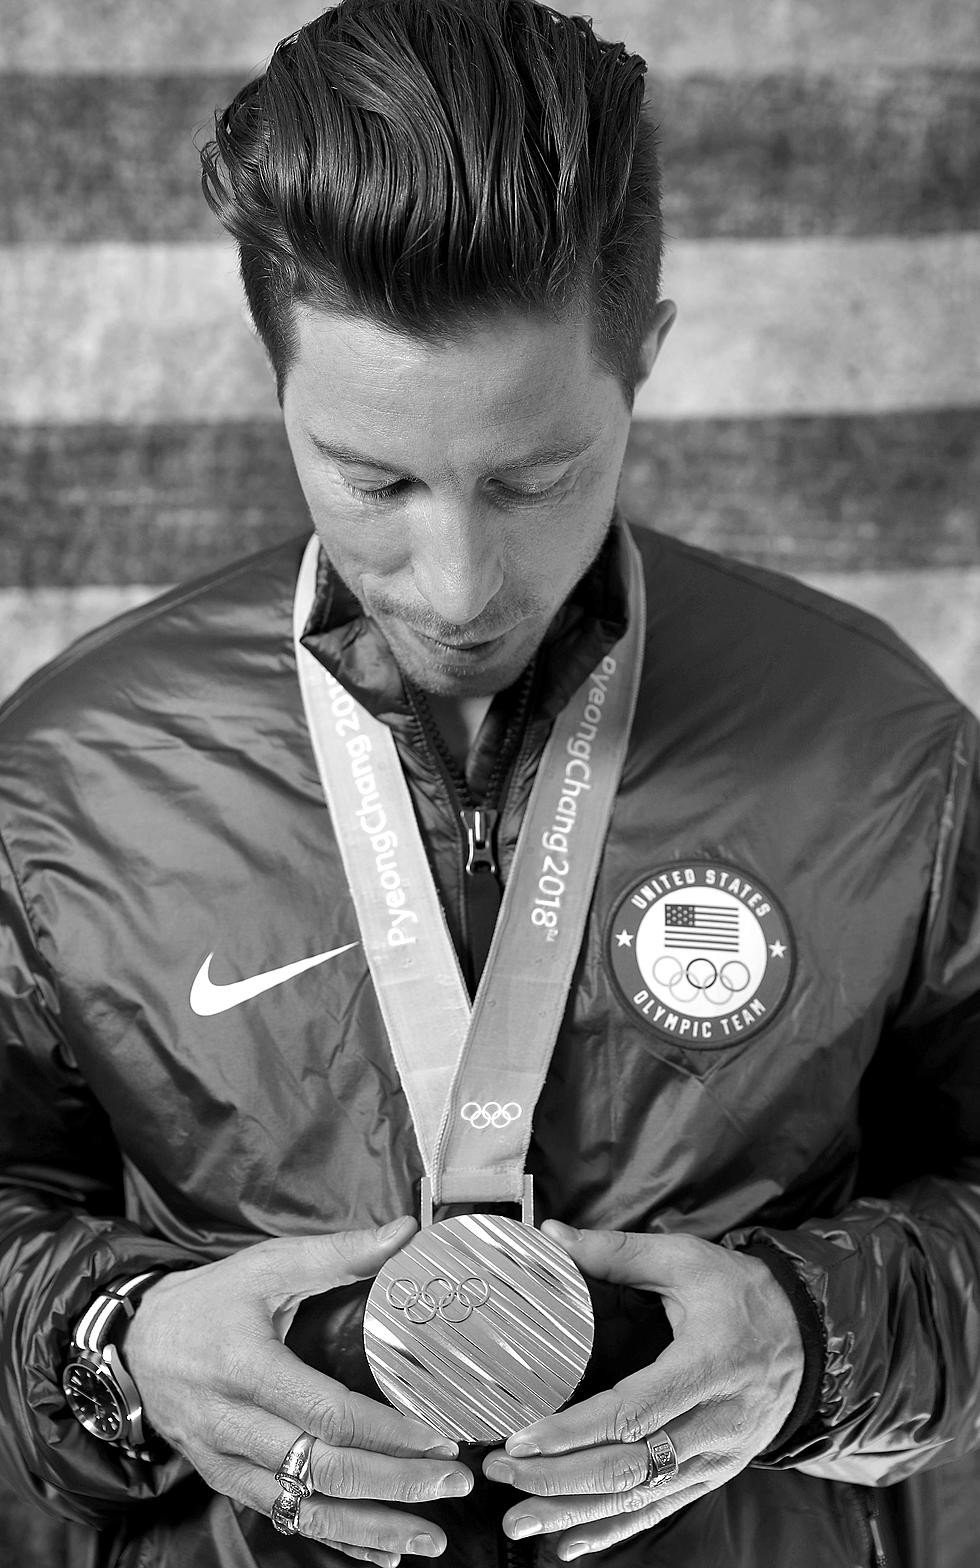 ICYMI: Shaun White’s Gold Medal Marked 100th for USA